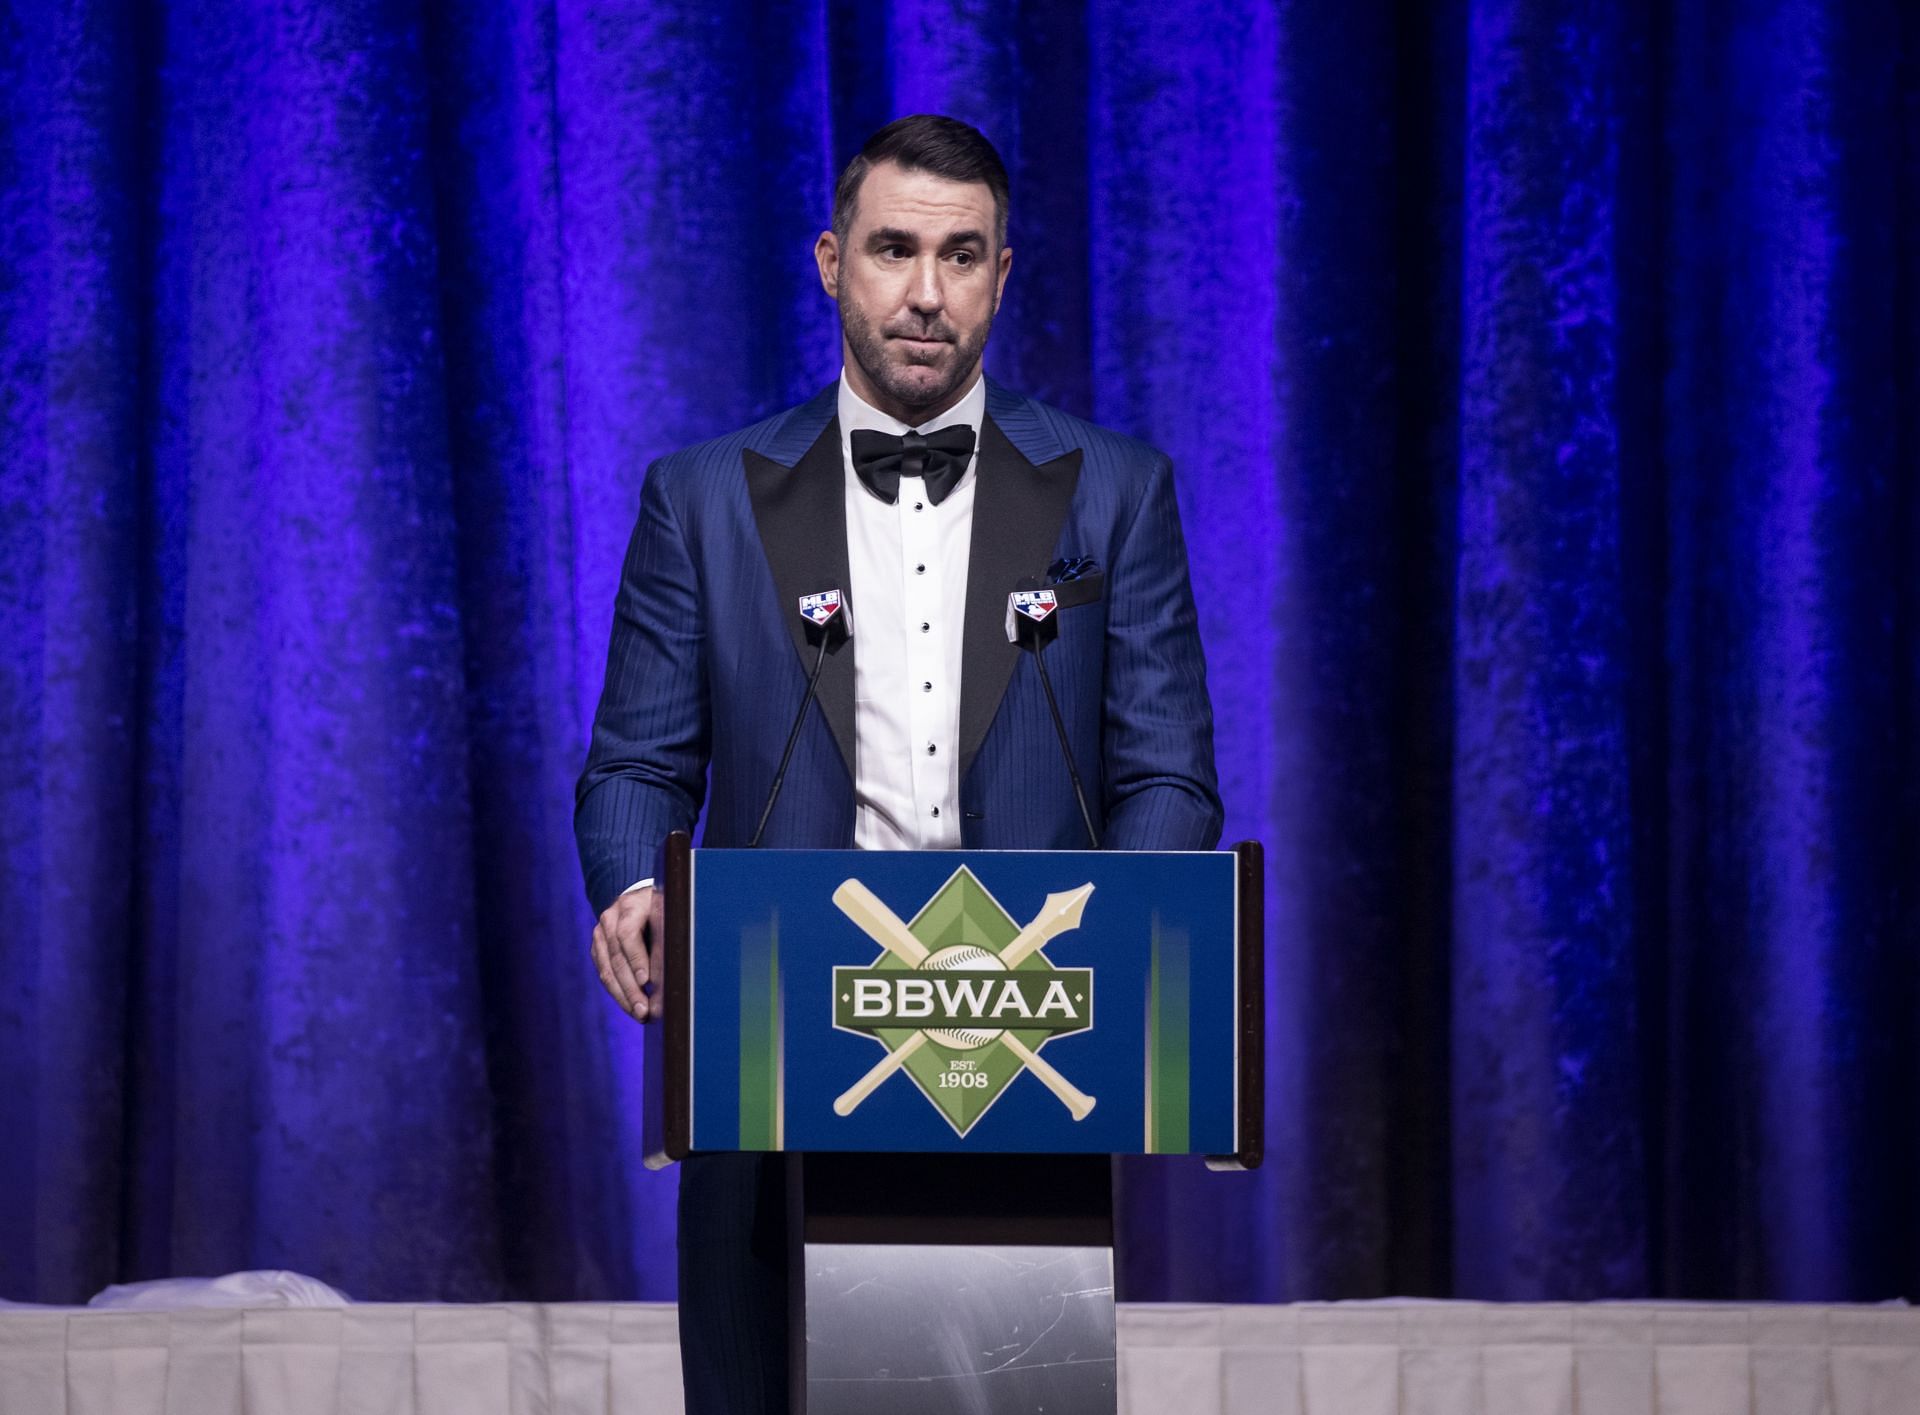 2023 BBWAA Dinner NEW YORK, NY - JANUARY 28: Justin receives the American League Cy Young Award during the 2023 Baseball Writers&#039; Association of America awards dinner at New York Hilton on January 28, 2023, in New York City. (Photo by Michelle Farsi/Getty Images)